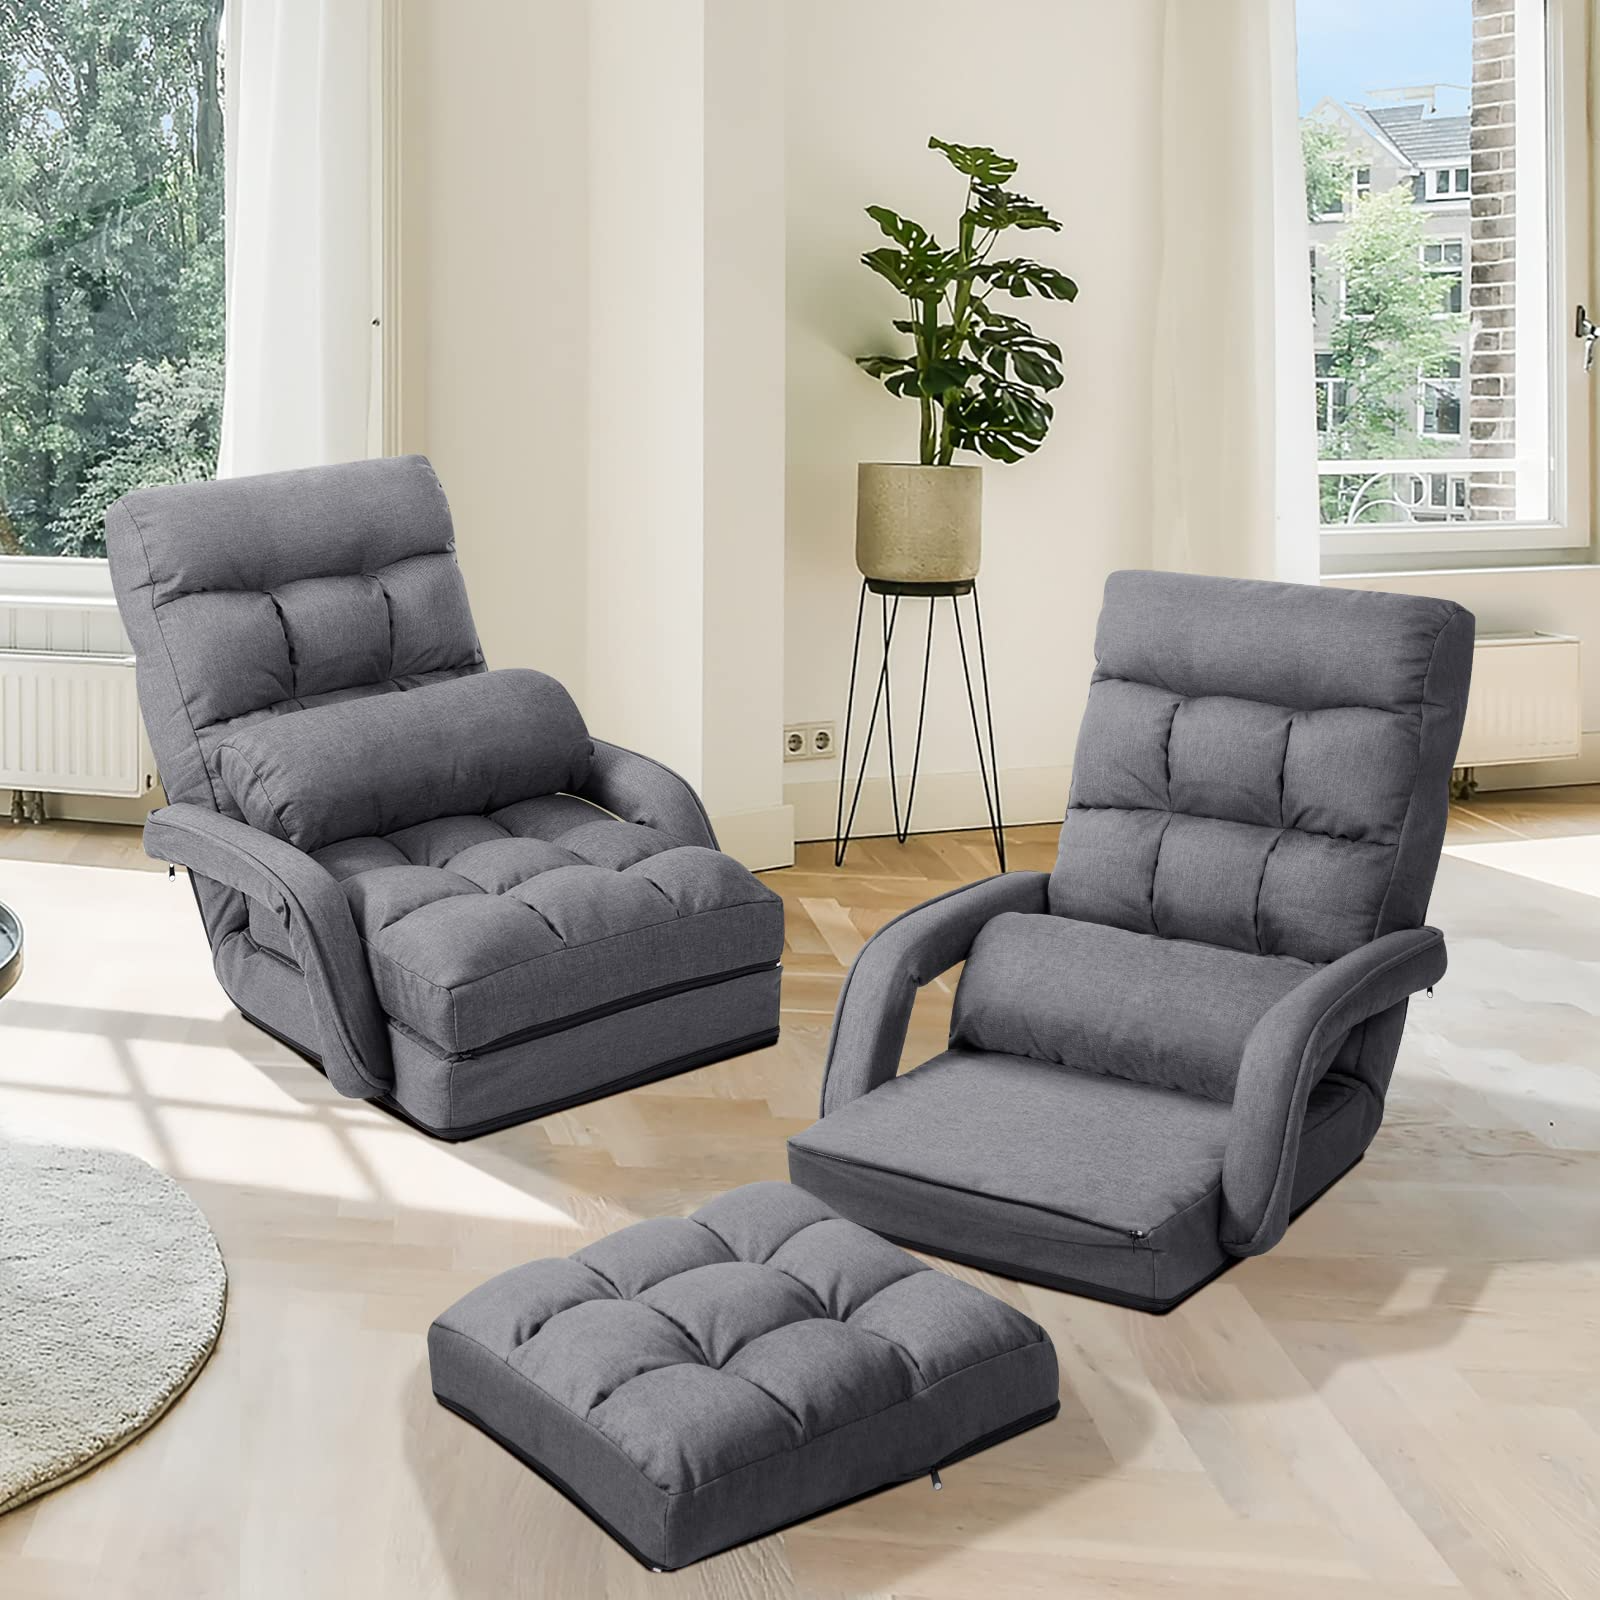 Updated Folding Lazy Sofa Floor Chair Sofa Lounger Bed